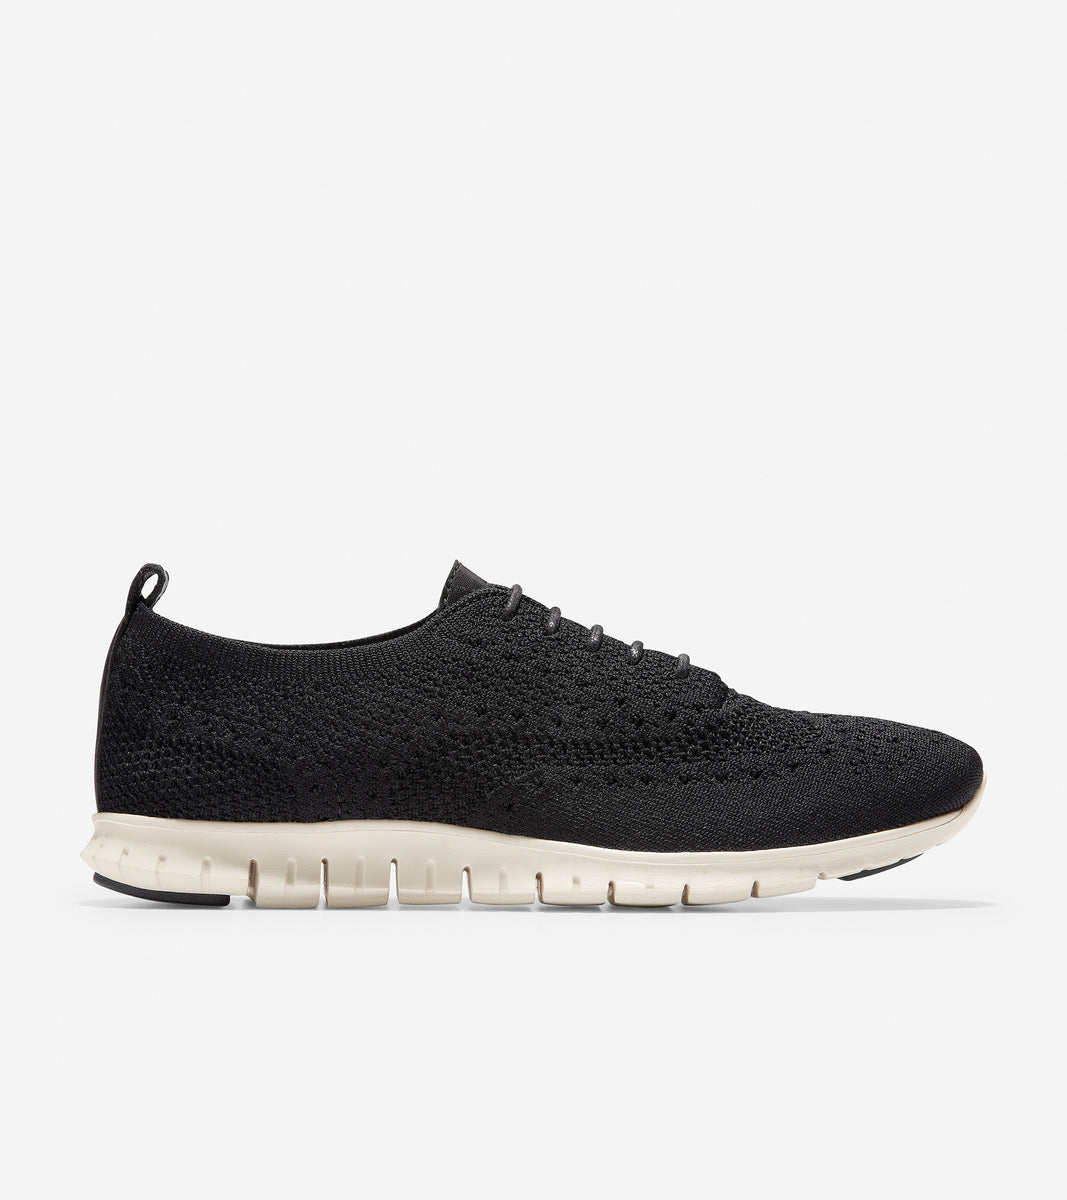 Zapatos Mujer ZERØGRAND Wingtip Oxford | Cole Haan Colombia